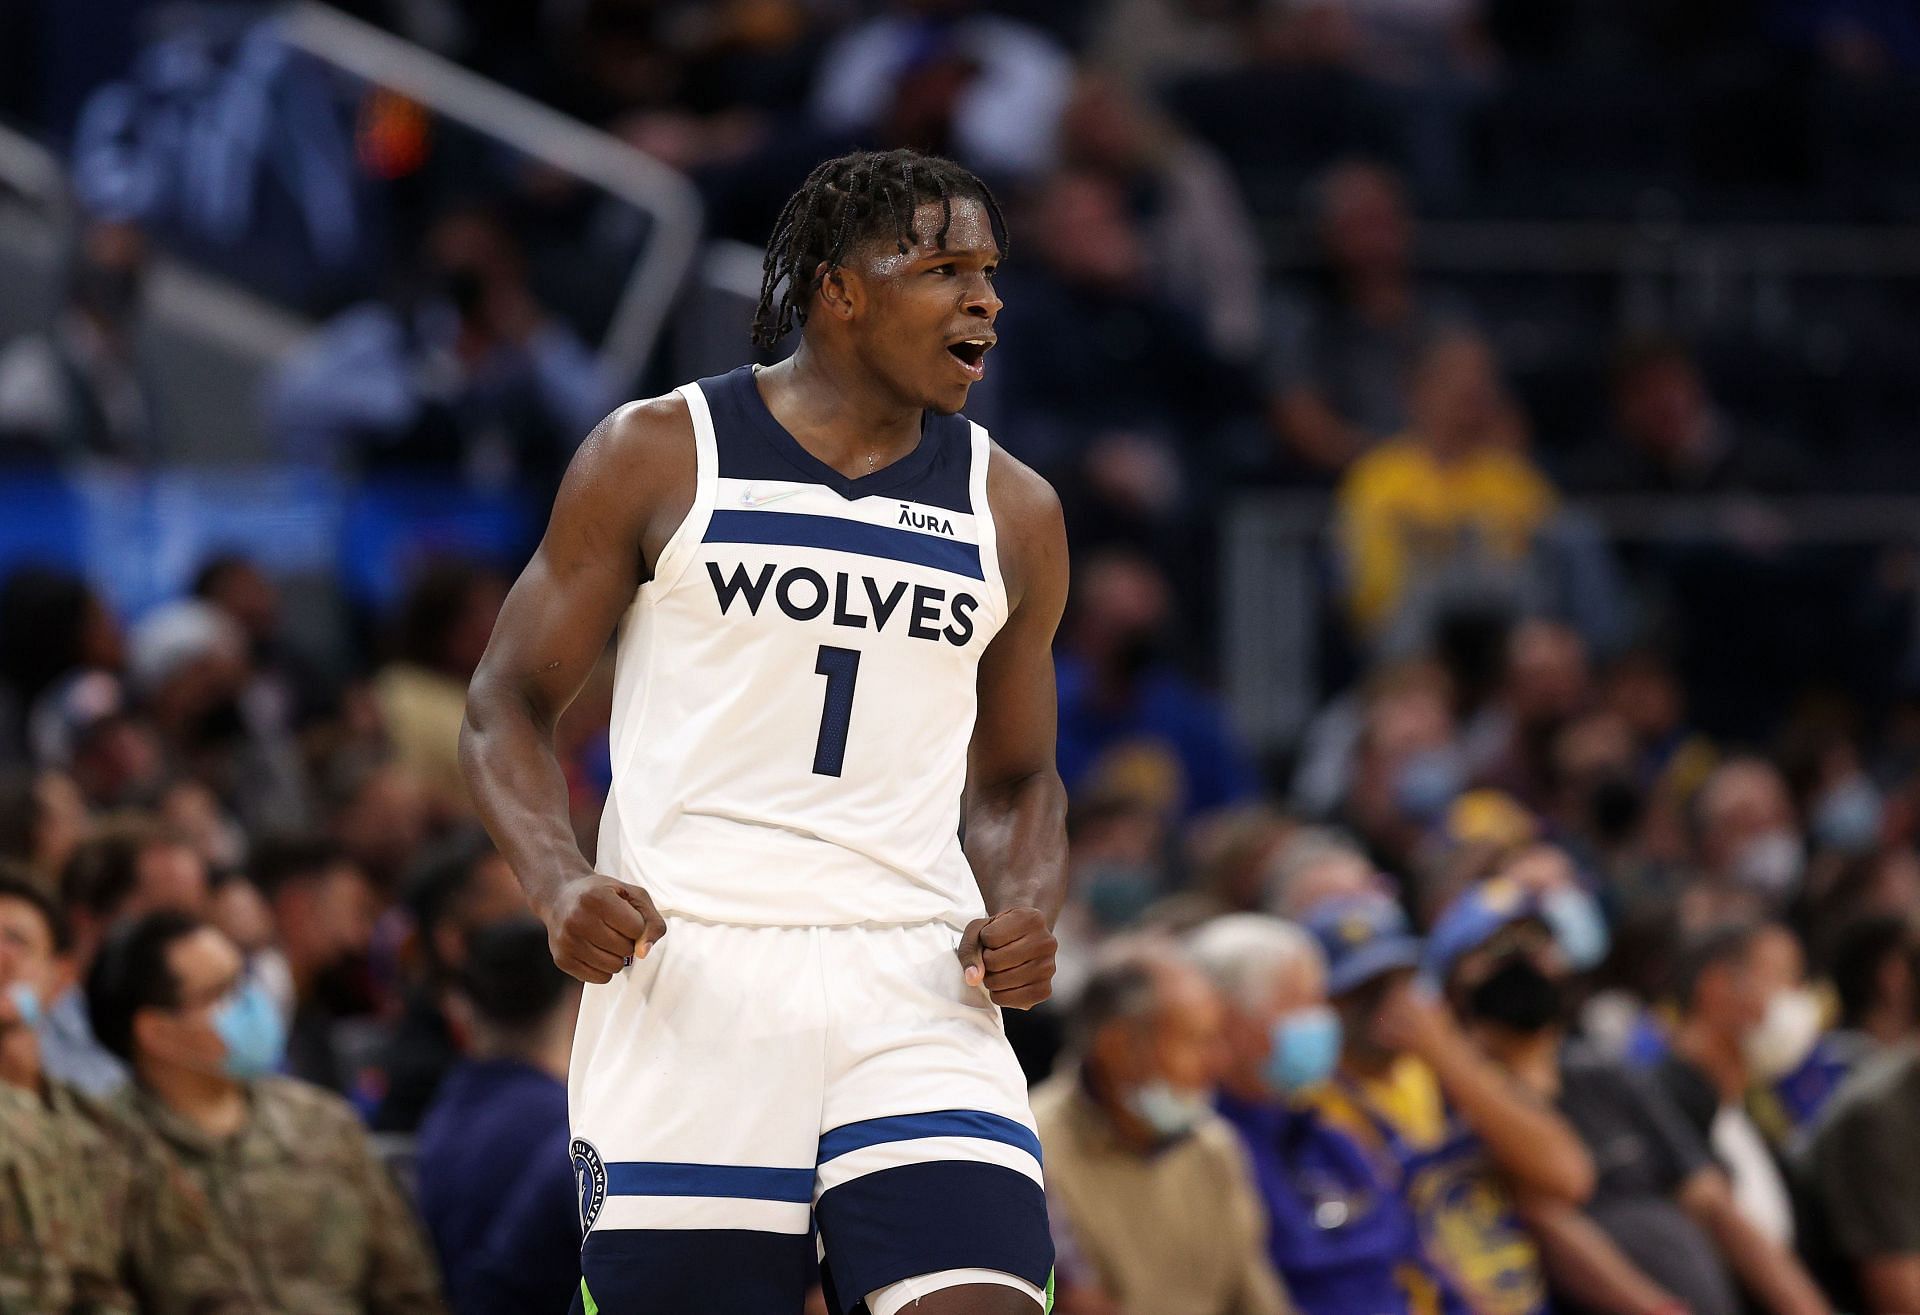 Anthony Edwards is expected to play a key role for the Minnesota Timberwolves in the upcoming season.